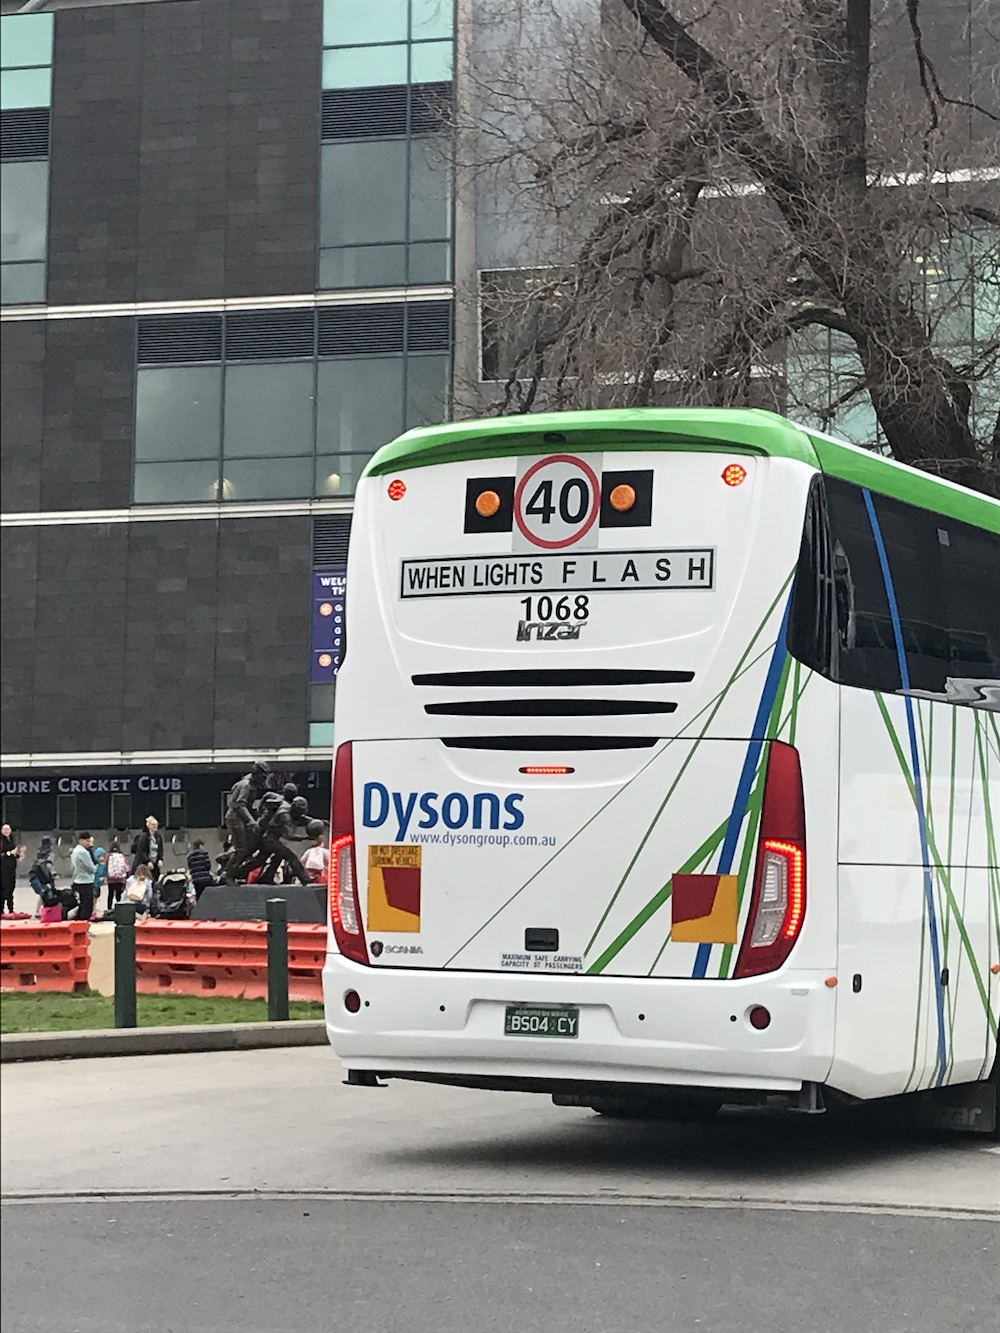 A bus with the text 'WHEN LIGHTS F L A S H' on a sign on the back